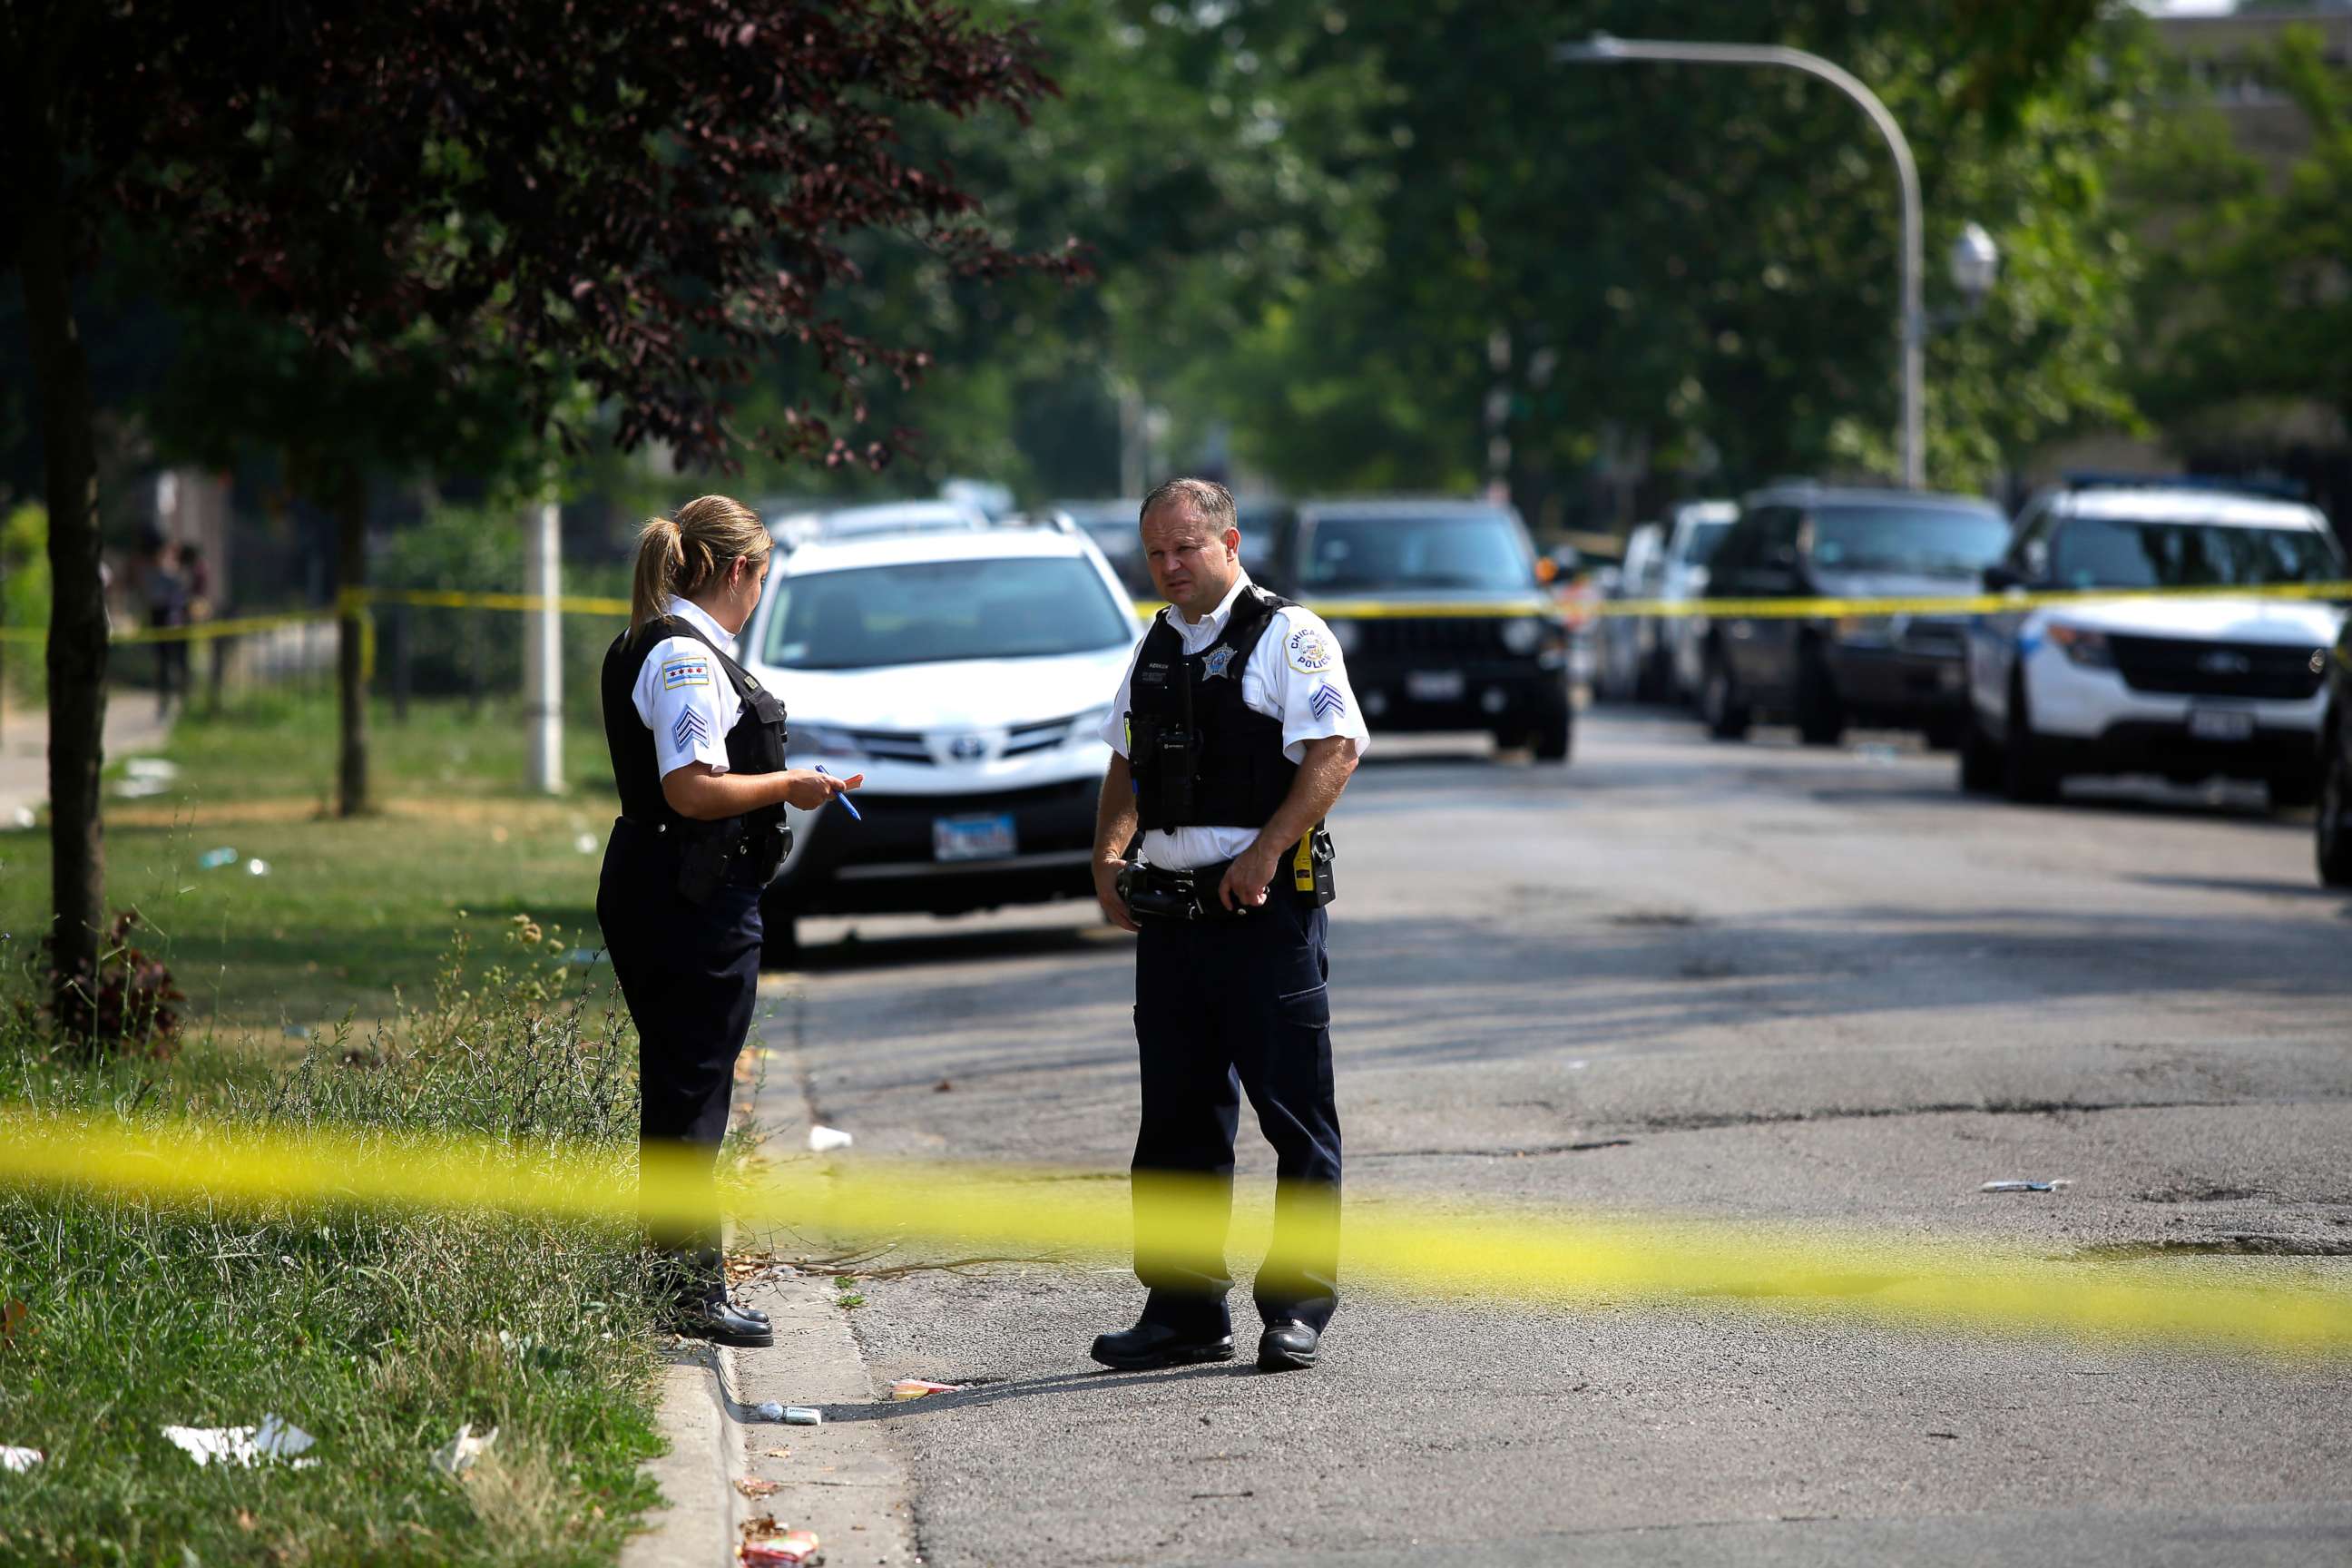 PHOTO: Chicago Police officers investigate a crime scene where a man was shot in the arm, August 12, 2018. According to statistics Chicago has more victims shootings and stabbings than both New York City and Los Angeles together.